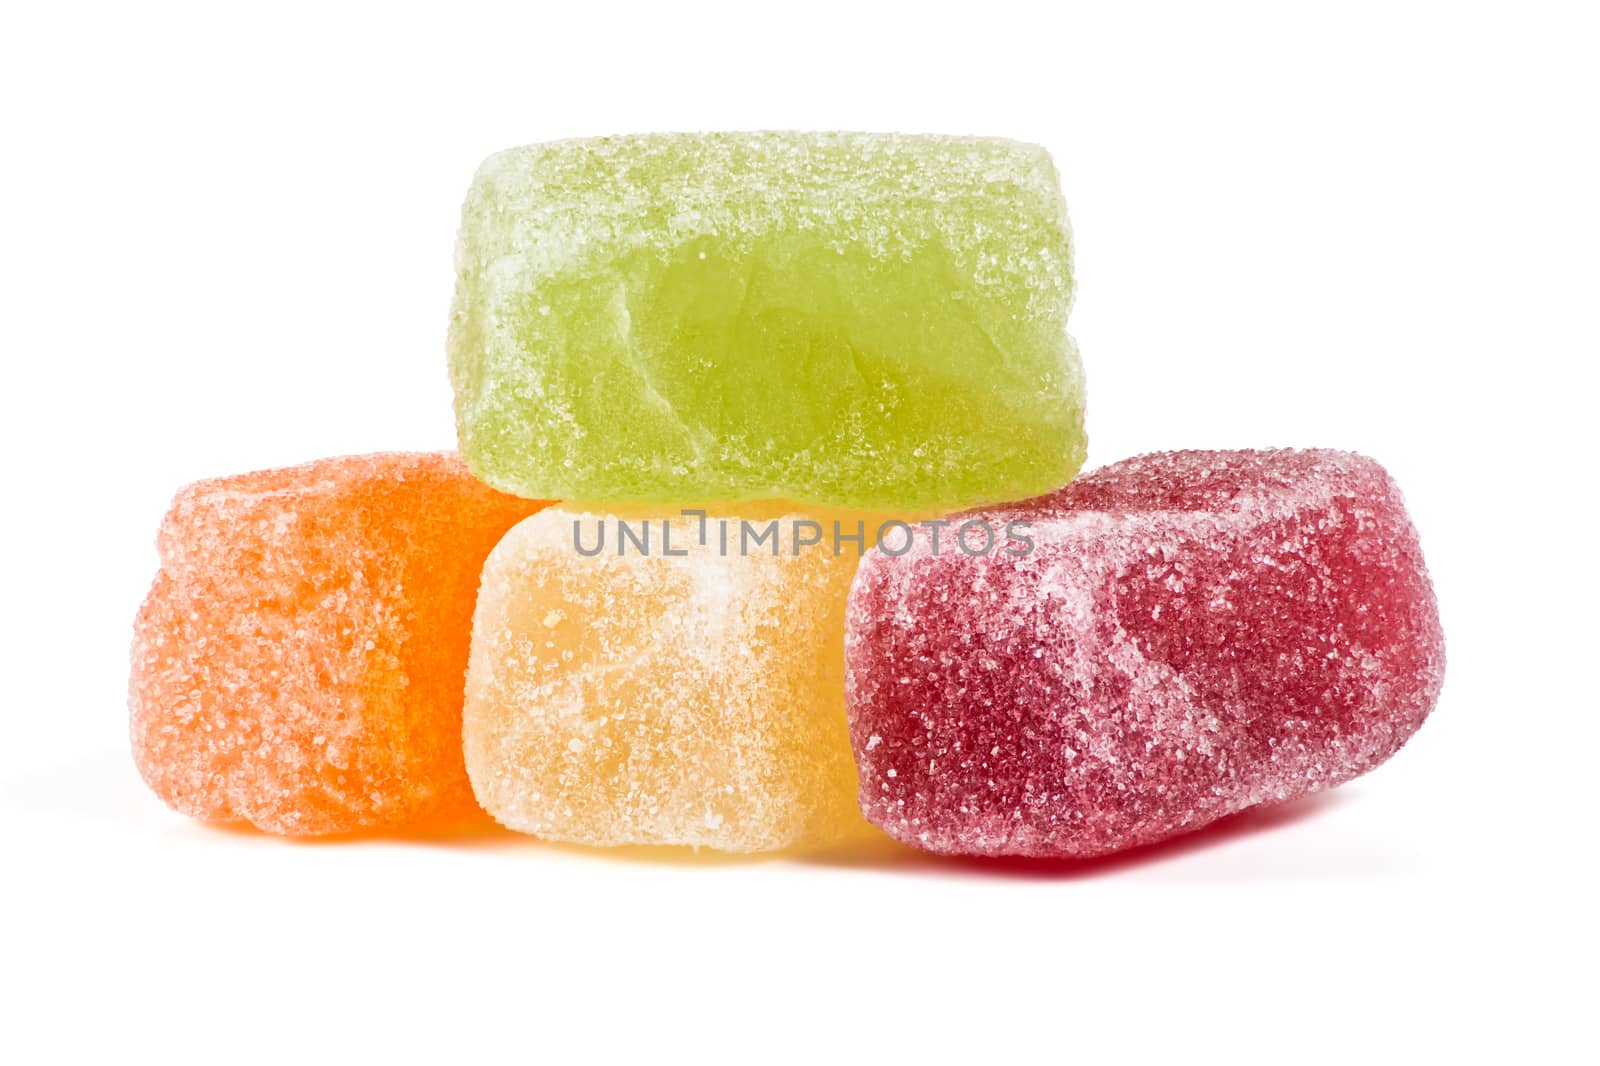 Marmalade, jujube, juicy sweets in sugar on a white background